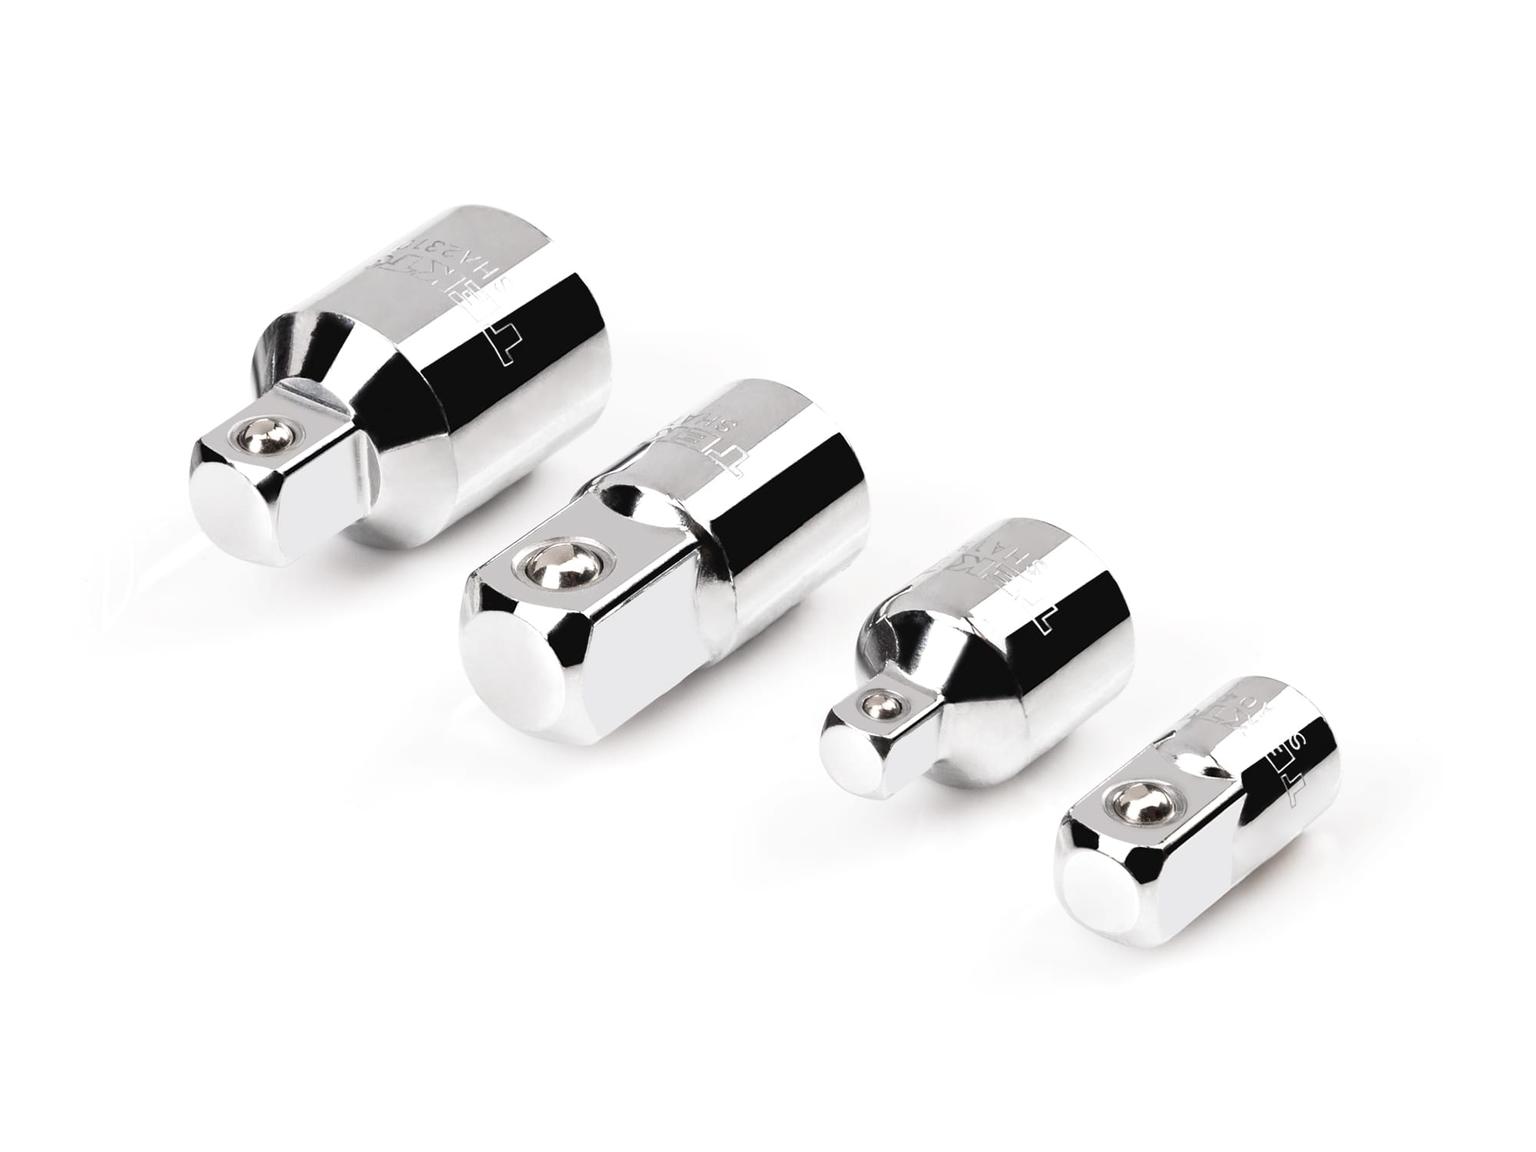 Adapter/Reducer Set, 4-Piece (1/4, 3/8, 1/2 in.)